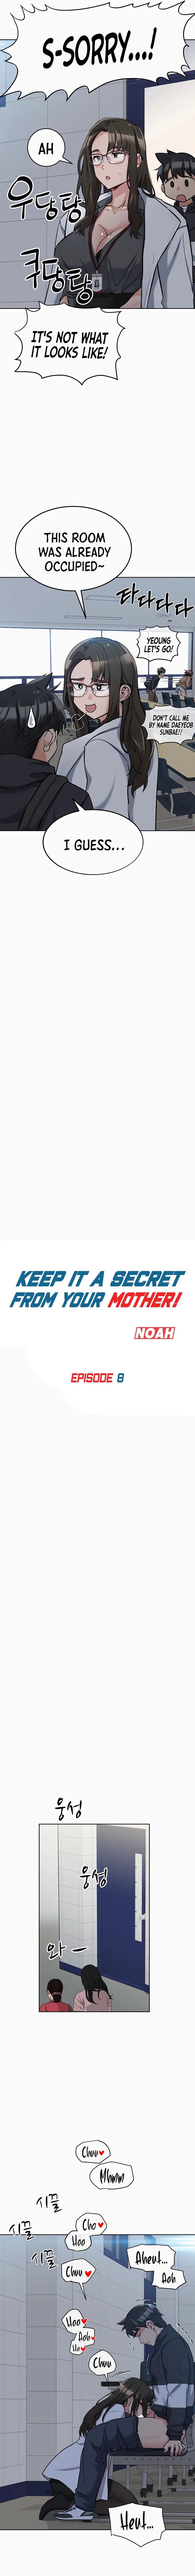 keep-it-a-secret-from-your-mother-001-chap-8-2